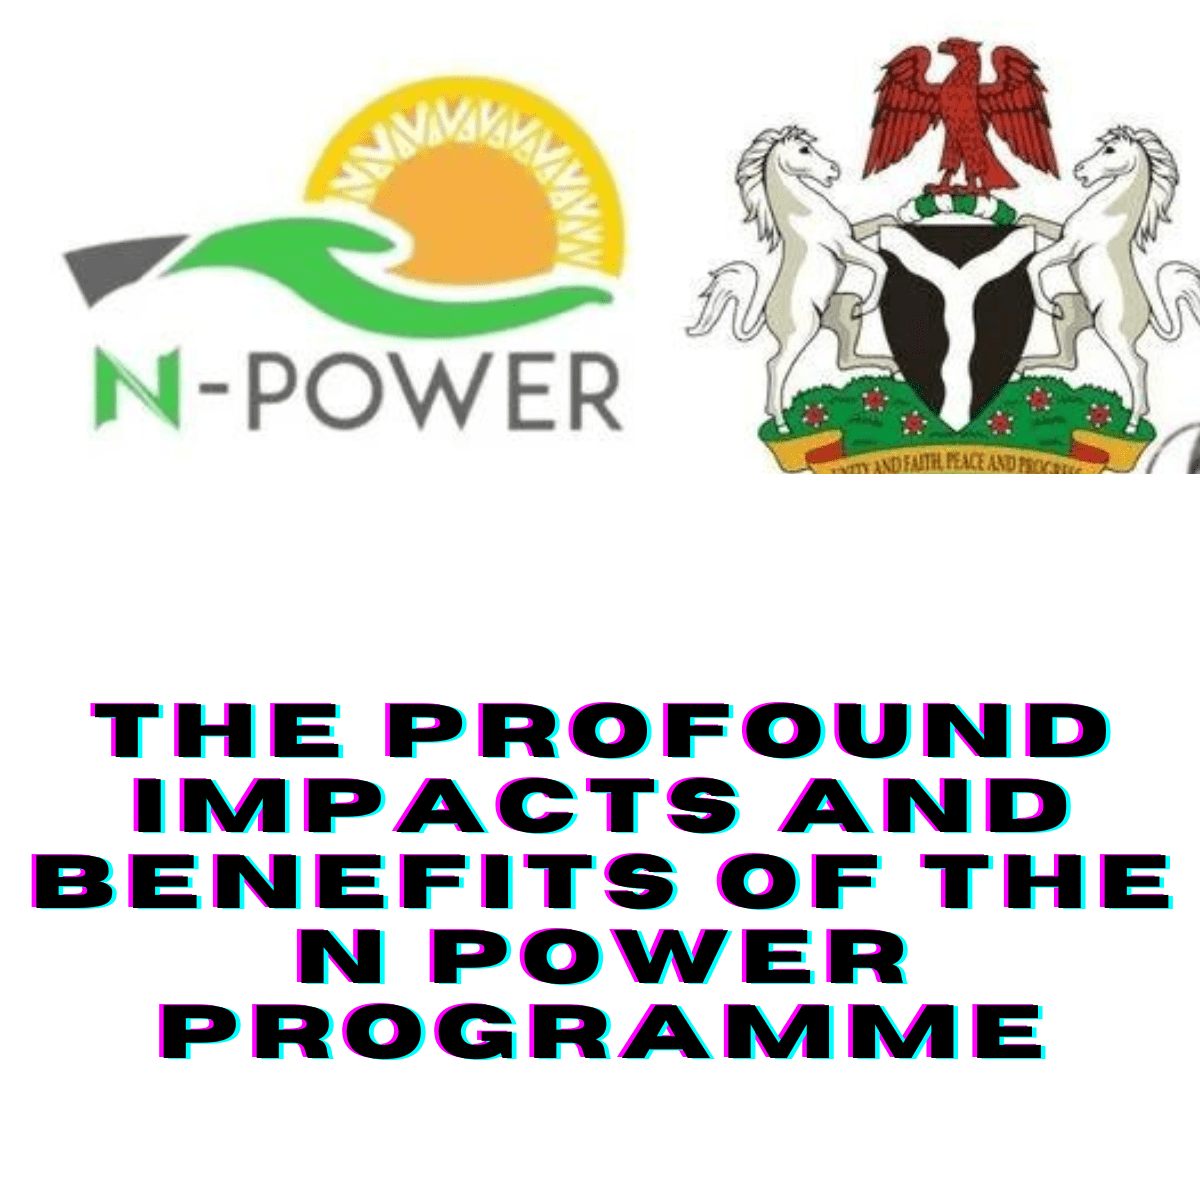 The Profound Impacts And Benefits Of The N Power Programme